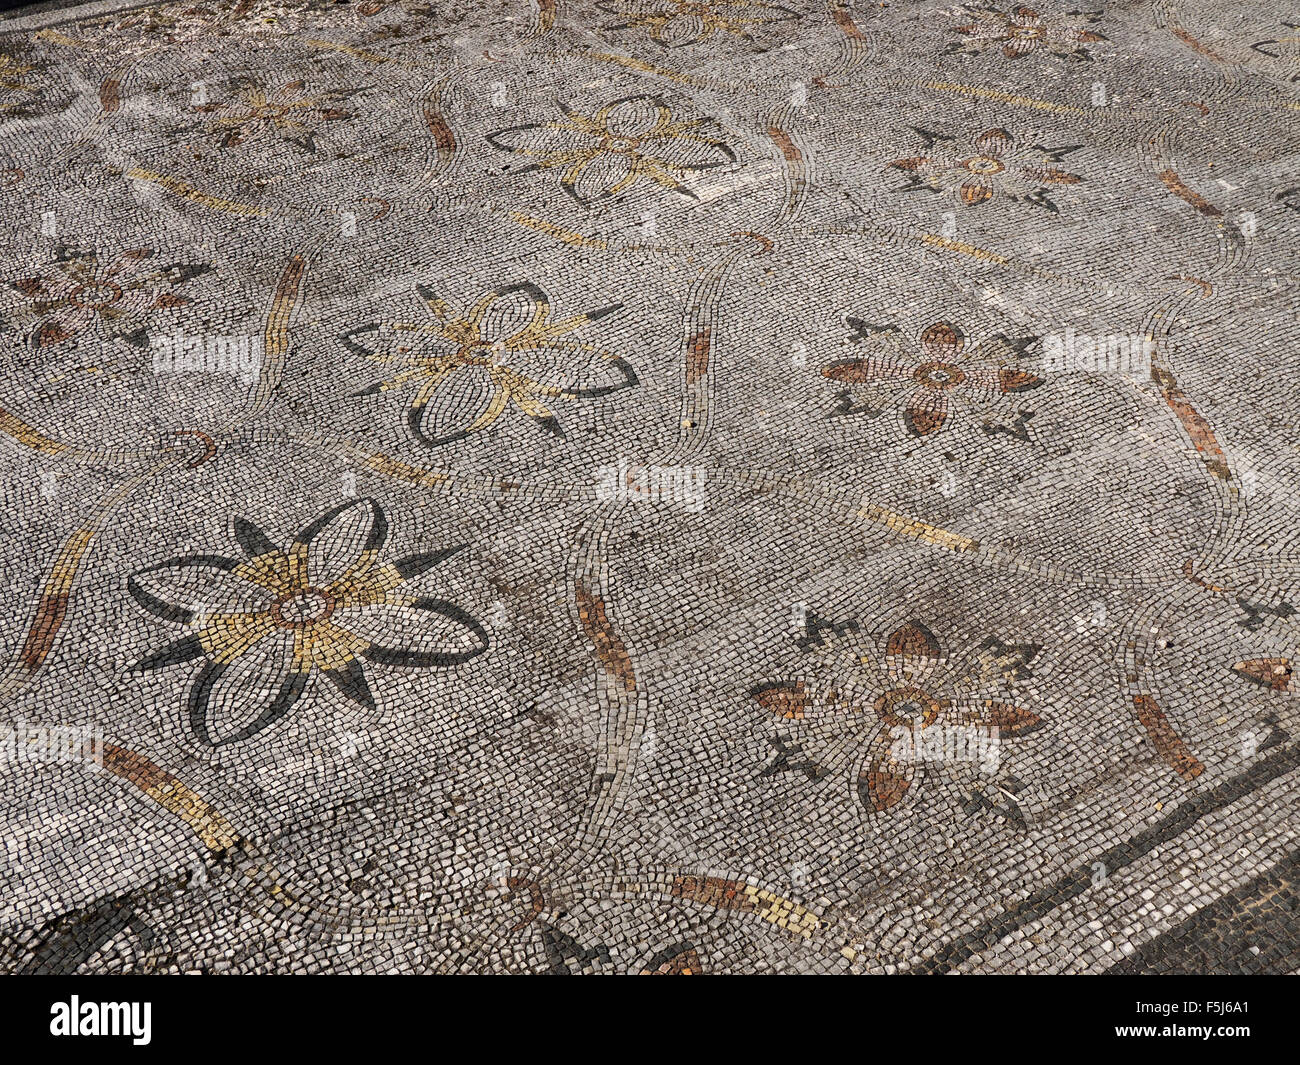 Well preserved Roman mosaic floor in the Ostia Antica excavation site near Rome, Italy Stock Photo